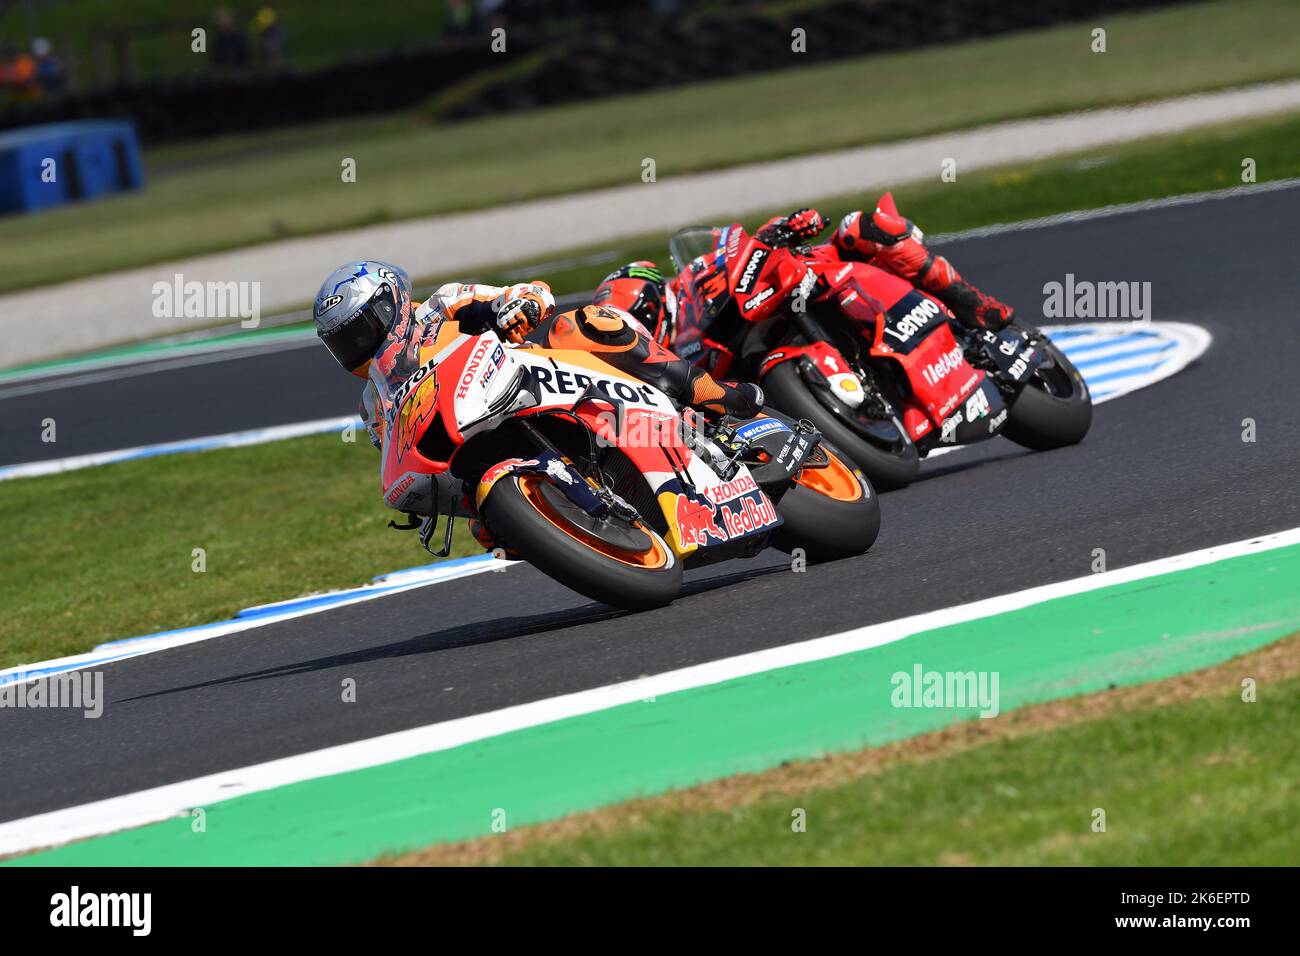 Melbourne, Australia. 14 October 2022.  Pol Espargaro, Repsol Honda Racing put in a time of 1'31.494 to place 11th during the Friday free practice session under sunny skies at the Phillip Island Circuit for the Australian Motorcycle Grand Prix Stock Photo